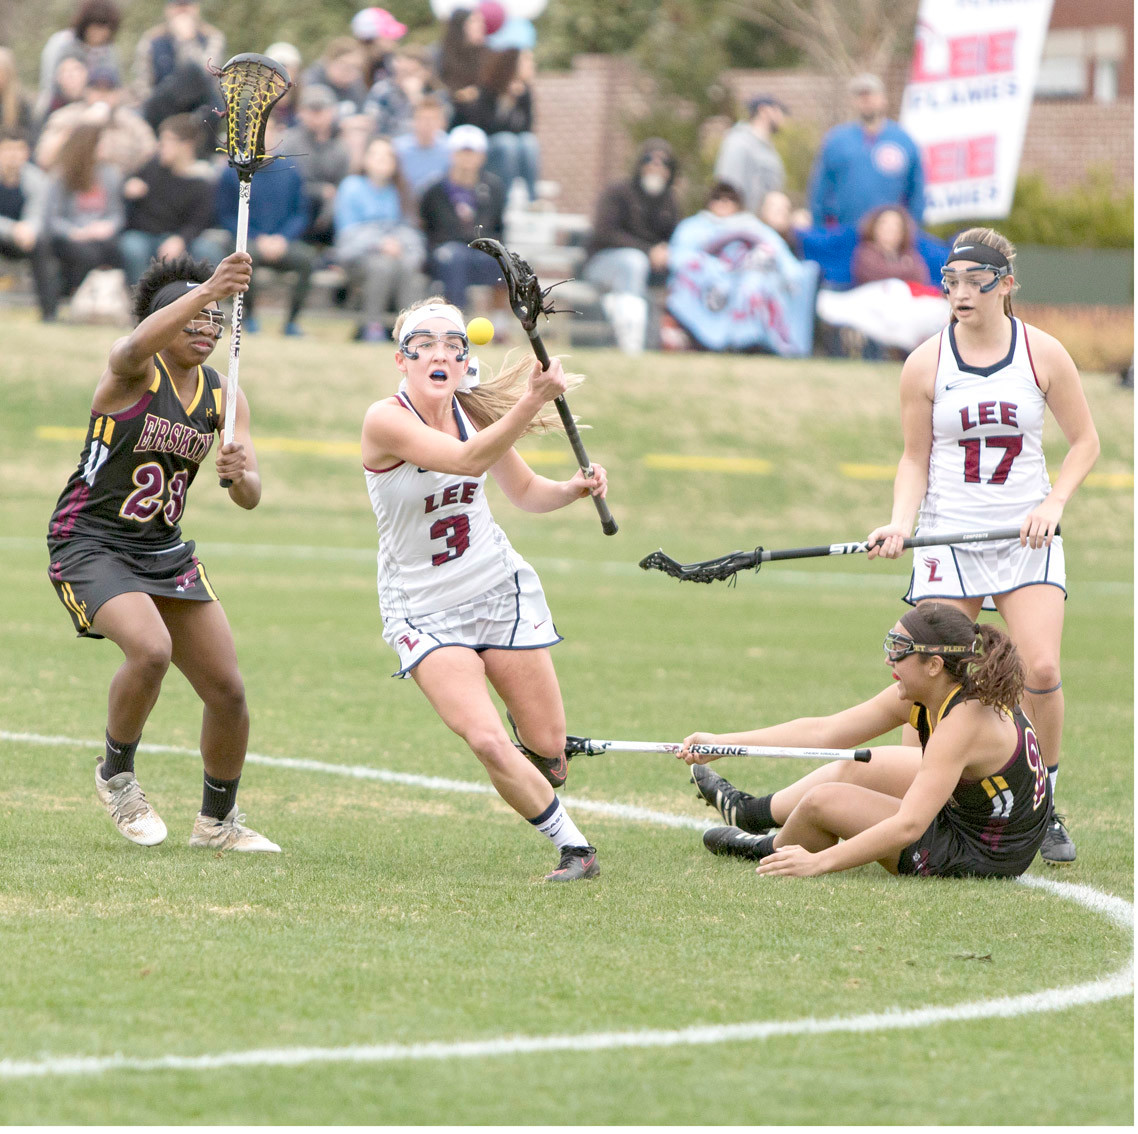 Flames' lacrosse wins 2nd straight | The Cleveland Daily Banner